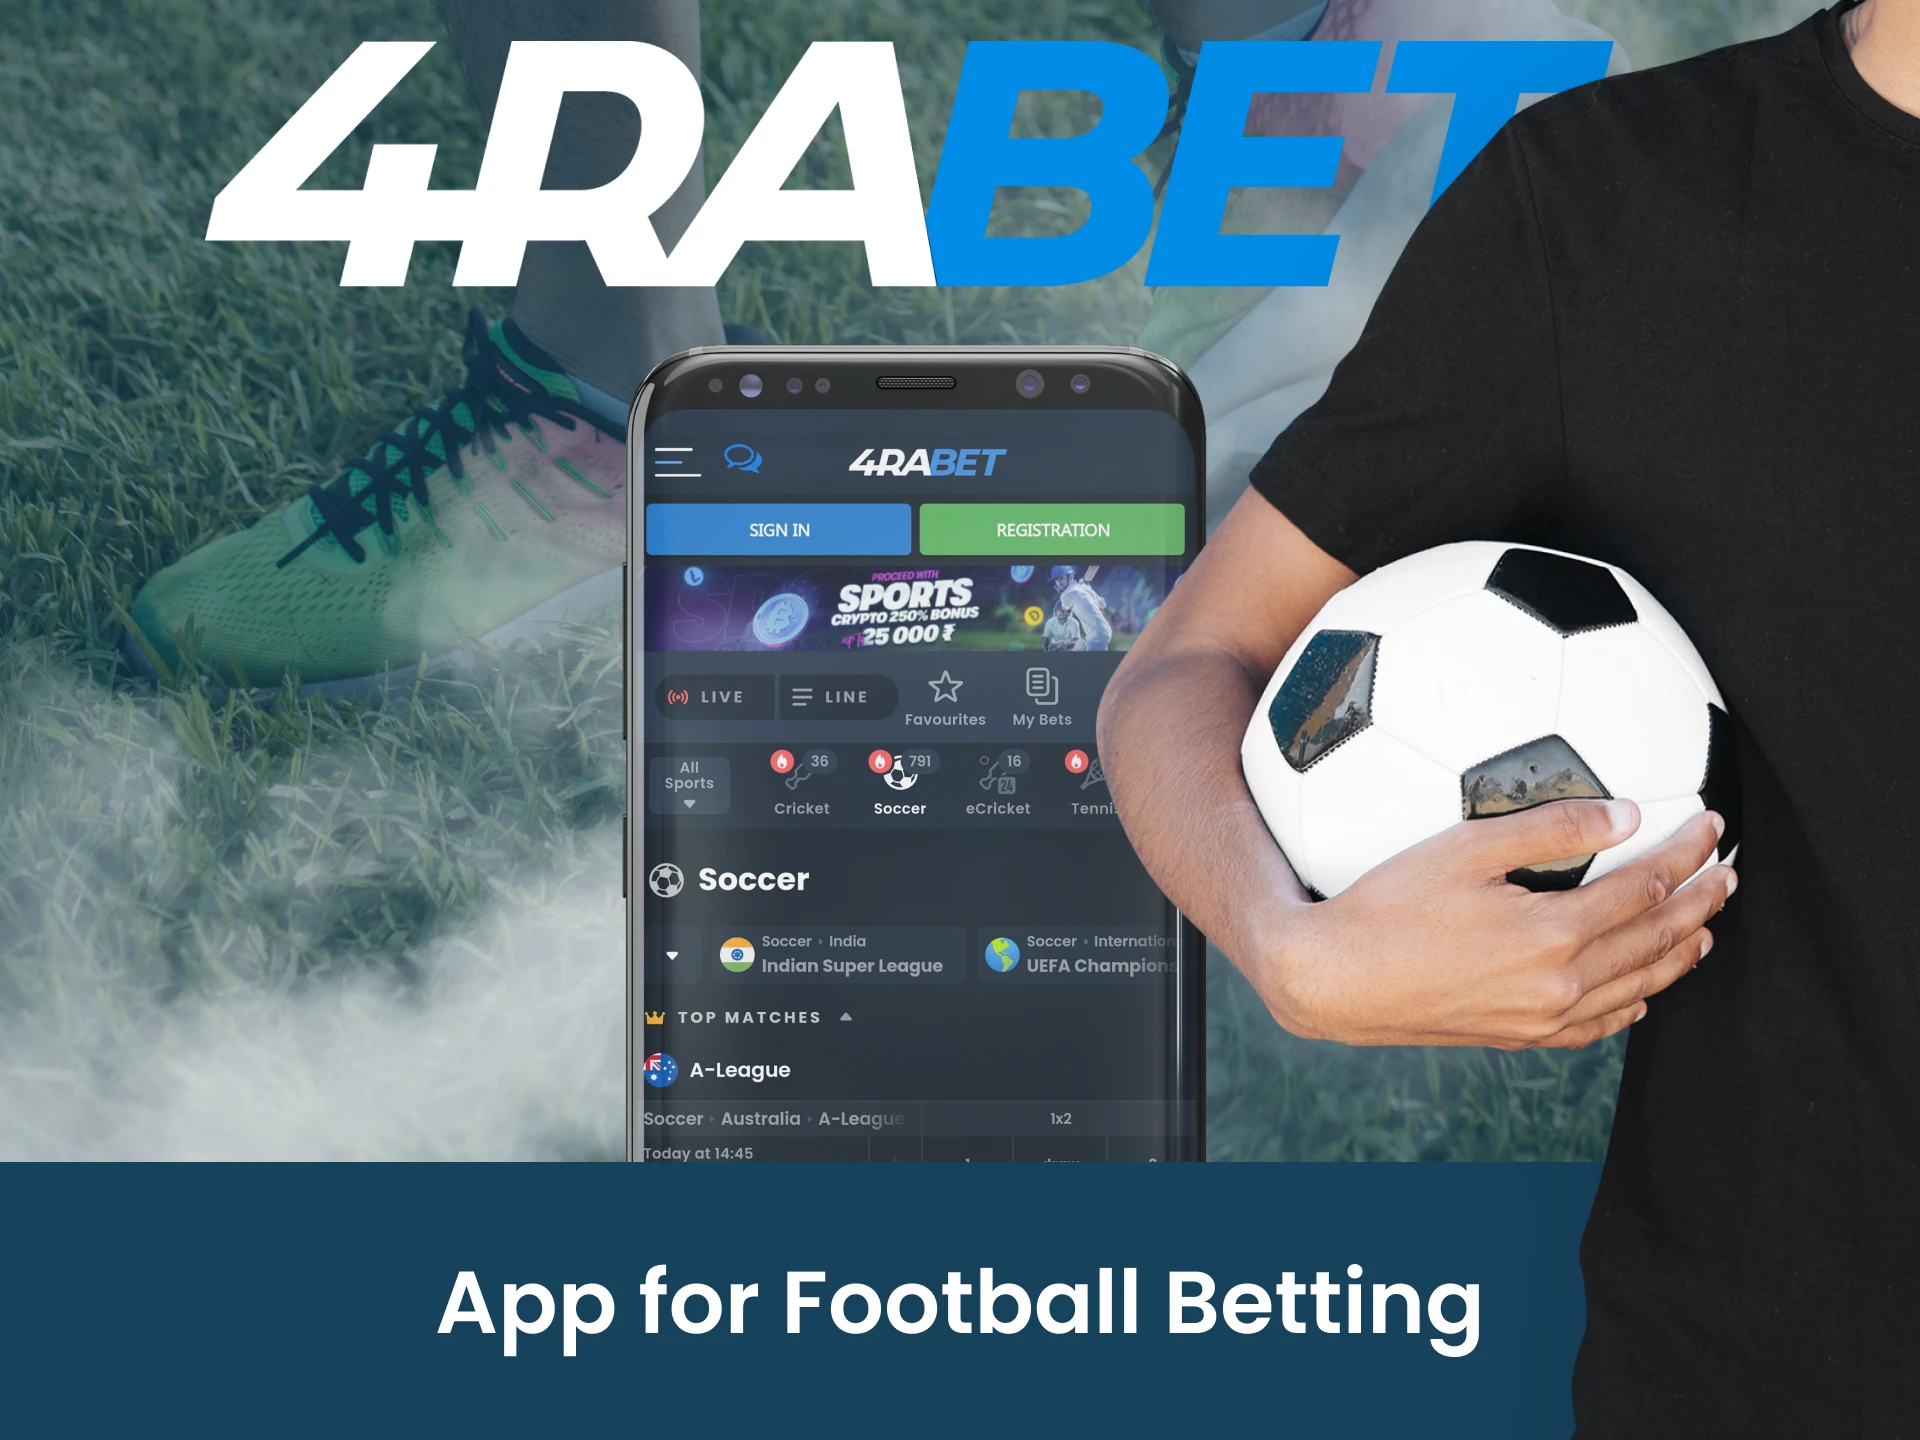 4rabet app is very useful for football betting via your smartphone.